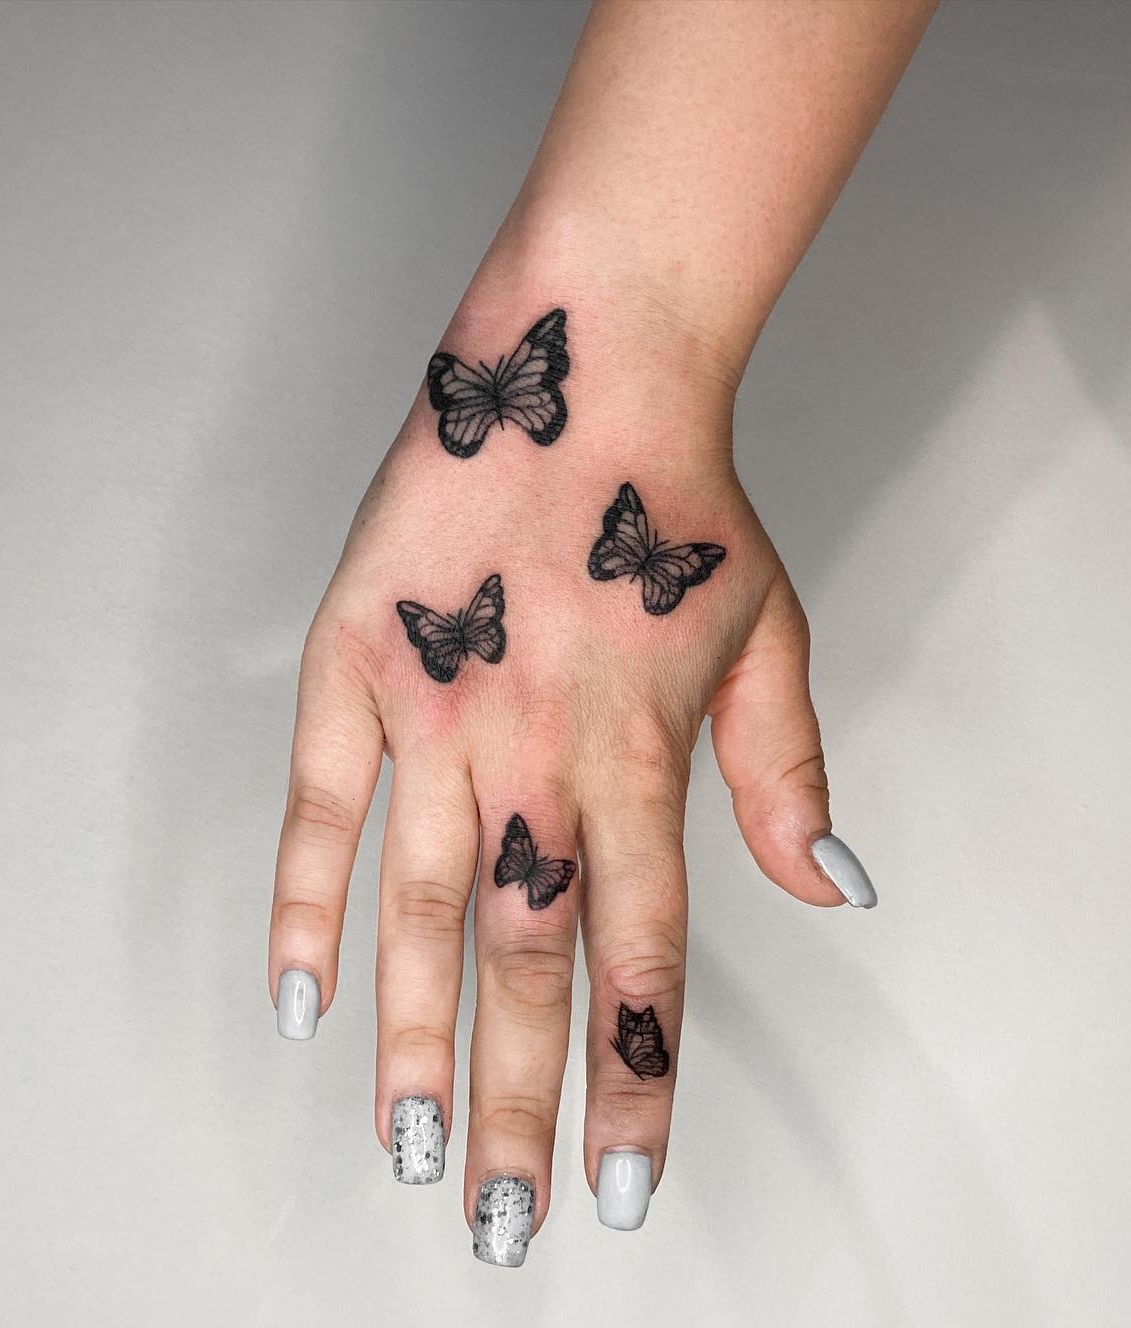 Butterfly Tattoo on Middle and Index Fingers